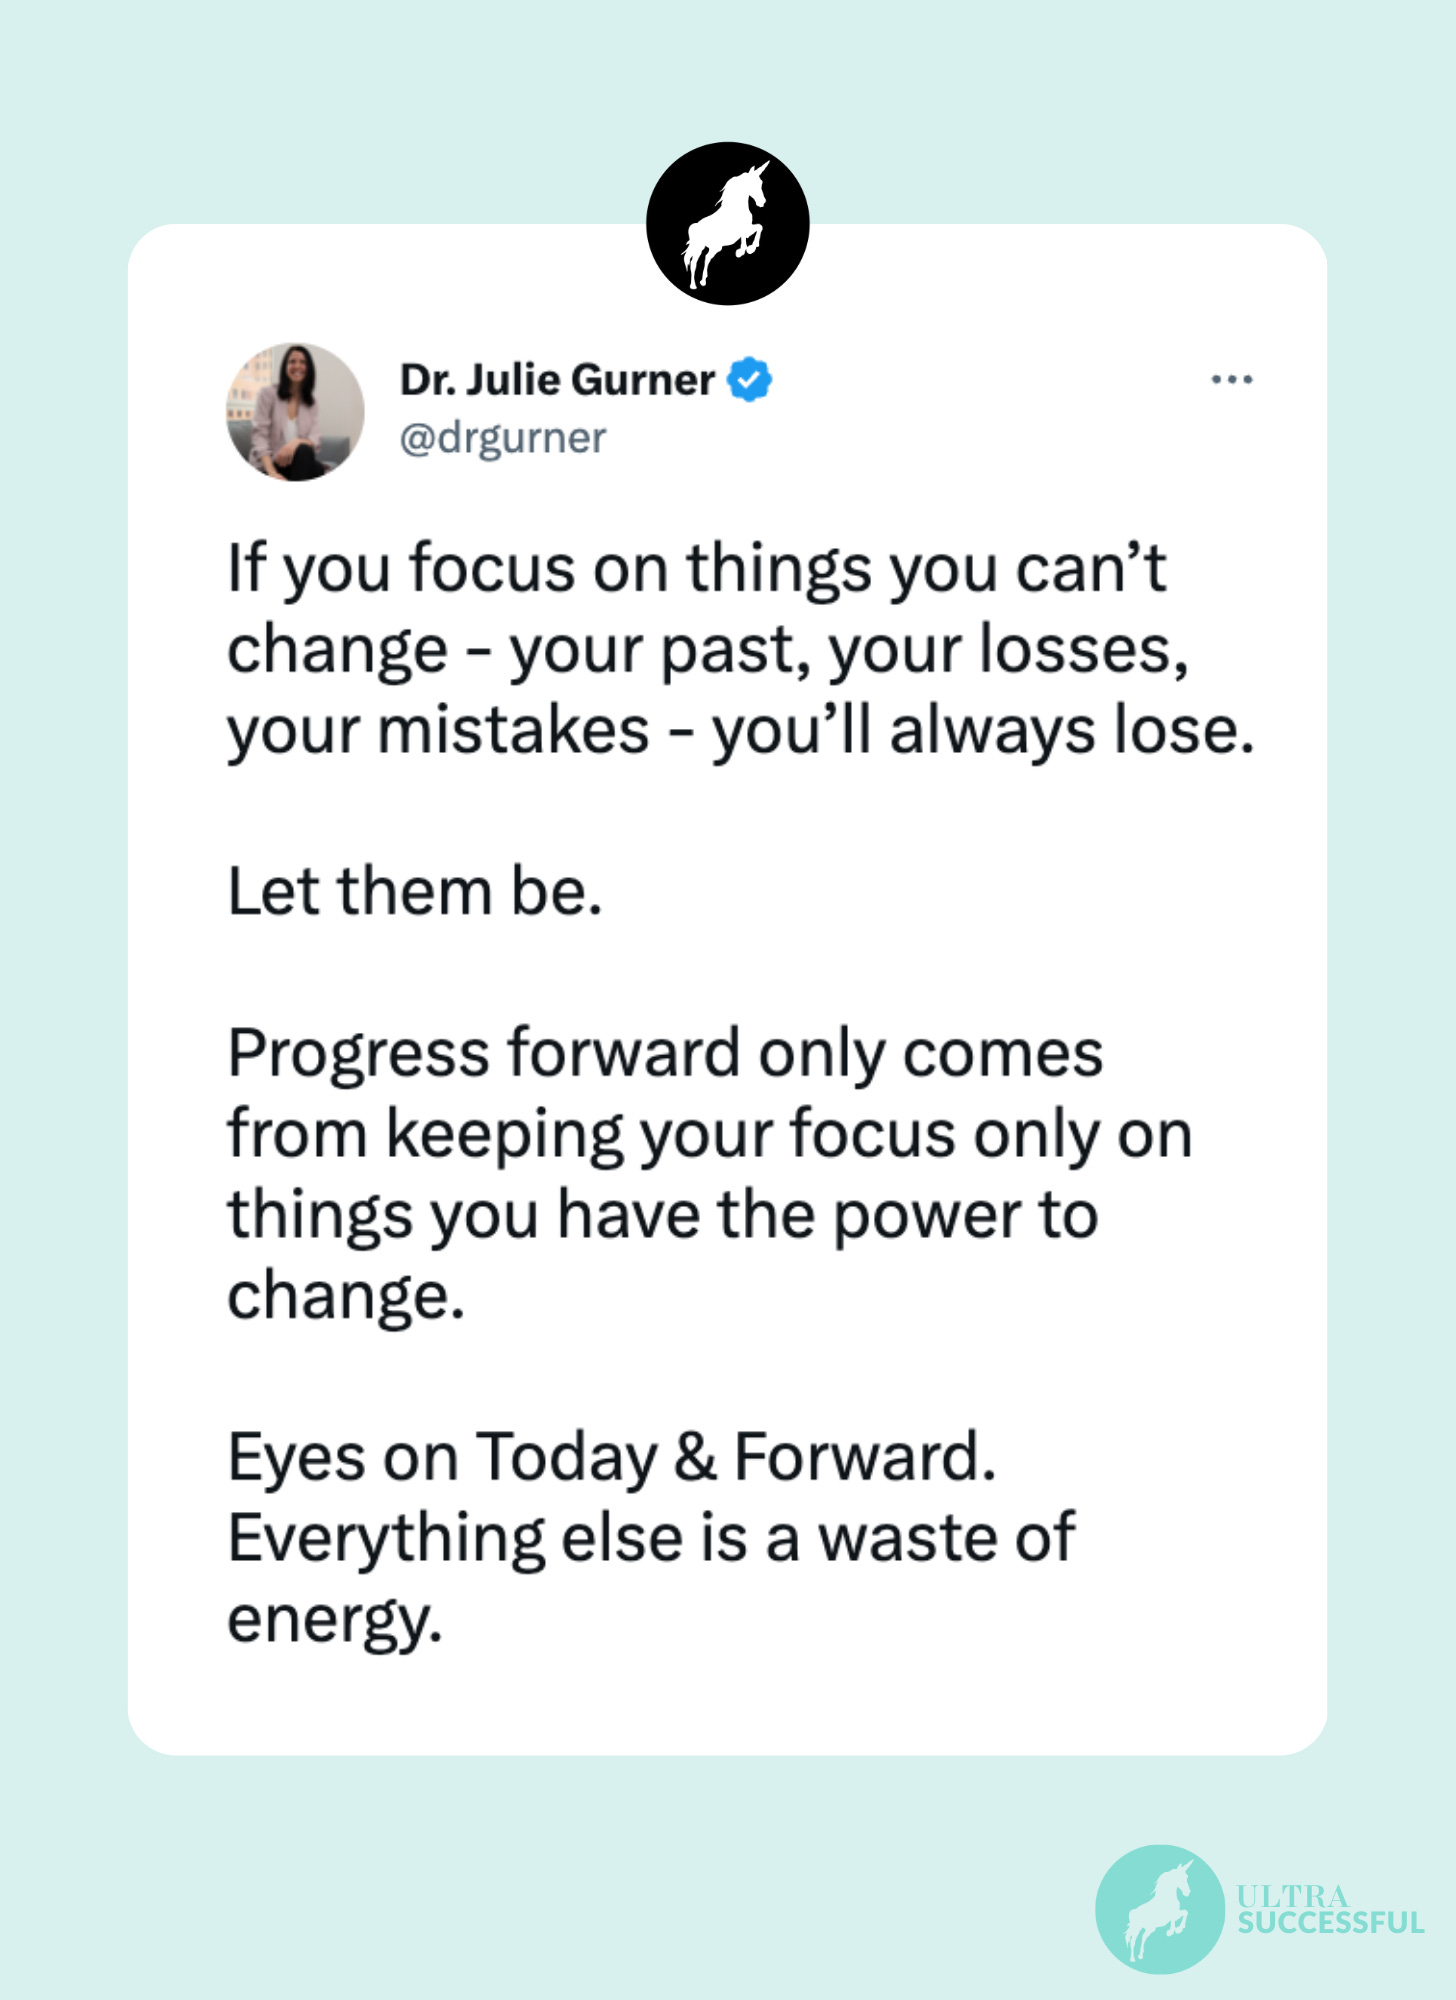 @drgurner: If you focus on things you can’t change - your past, your losses, your mistakes - you’ll always lose.  Let them be.  Progress forward only comes from keeping your focus only on things you have the power to change.  Eyes on Today & Forward. Everything else is a waste of energy.